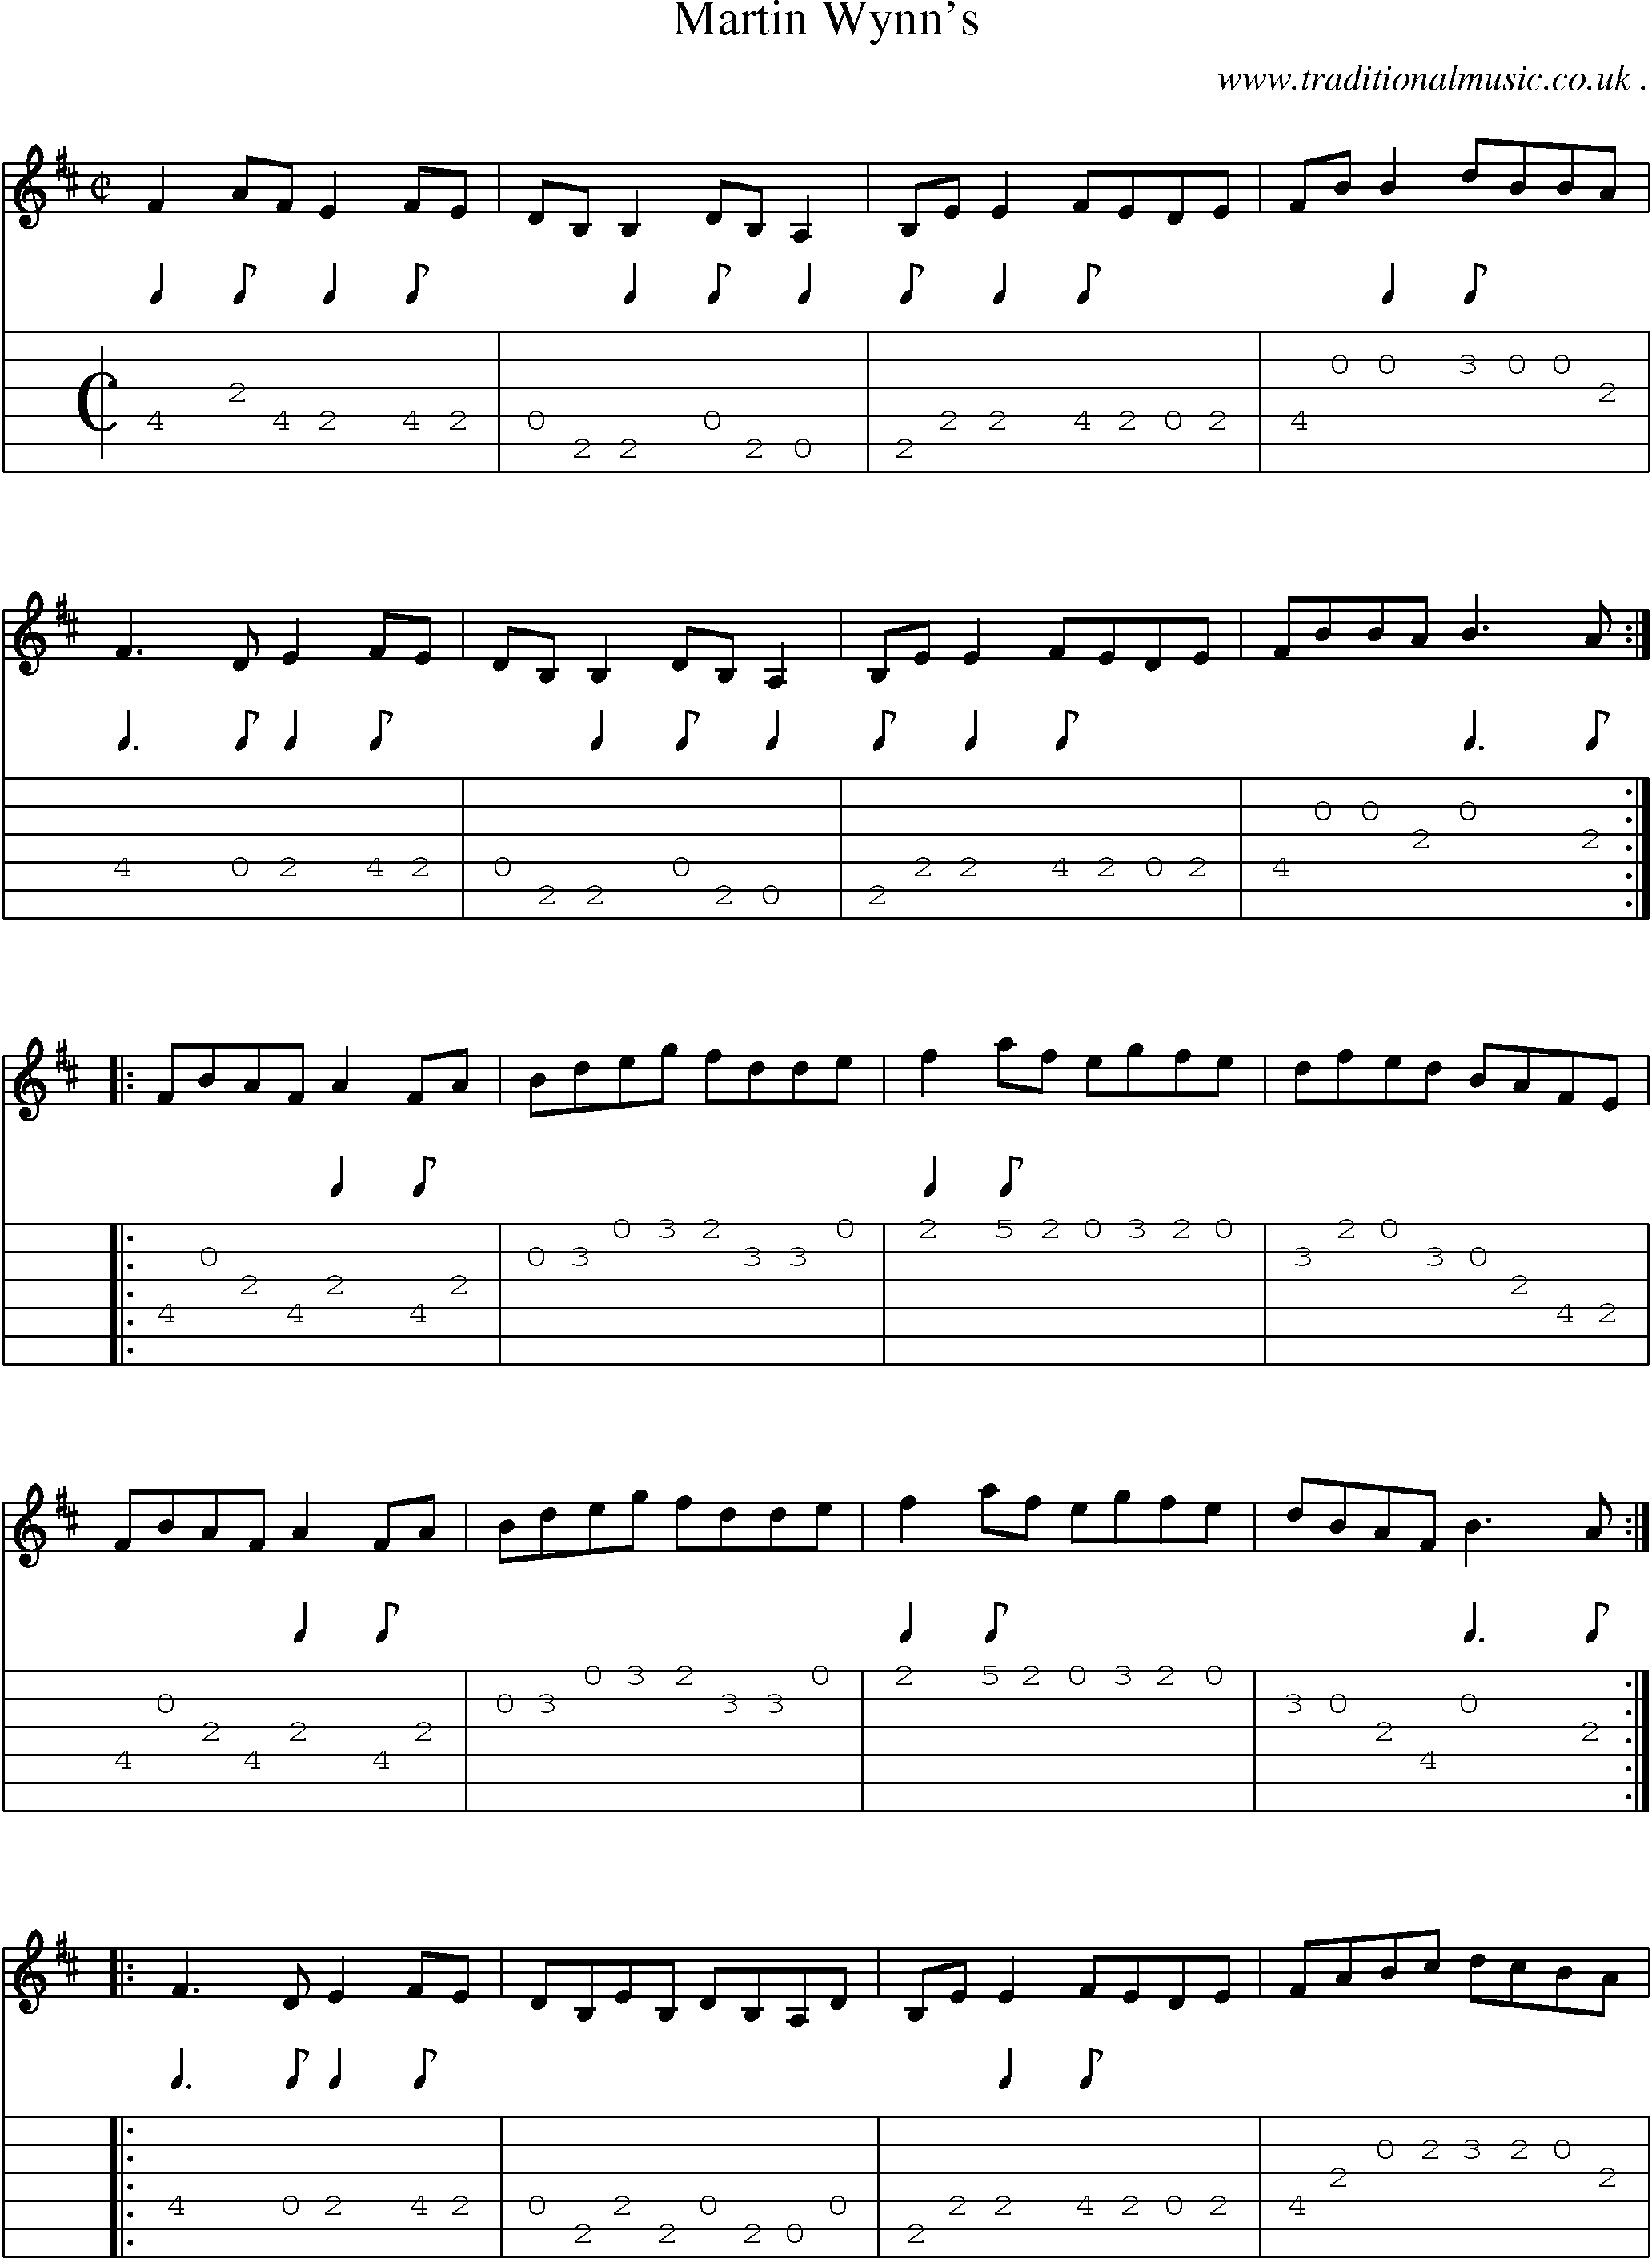 Sheet-Music and Guitar Tabs for Martin Wynns